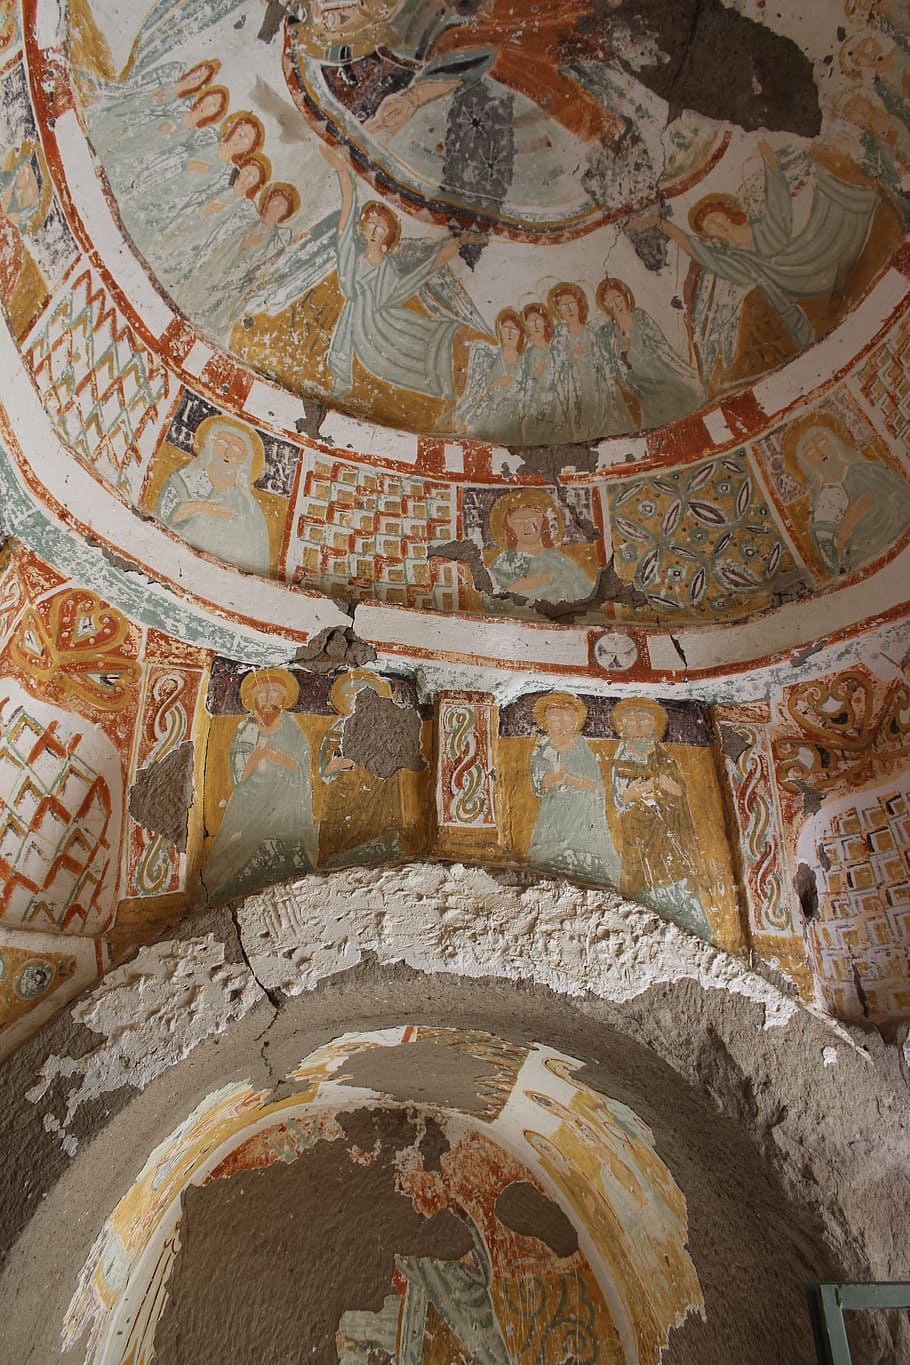 cappadocia, church, ceiling drawings, jesus, architecture, history, indoors, the past, mural, religion